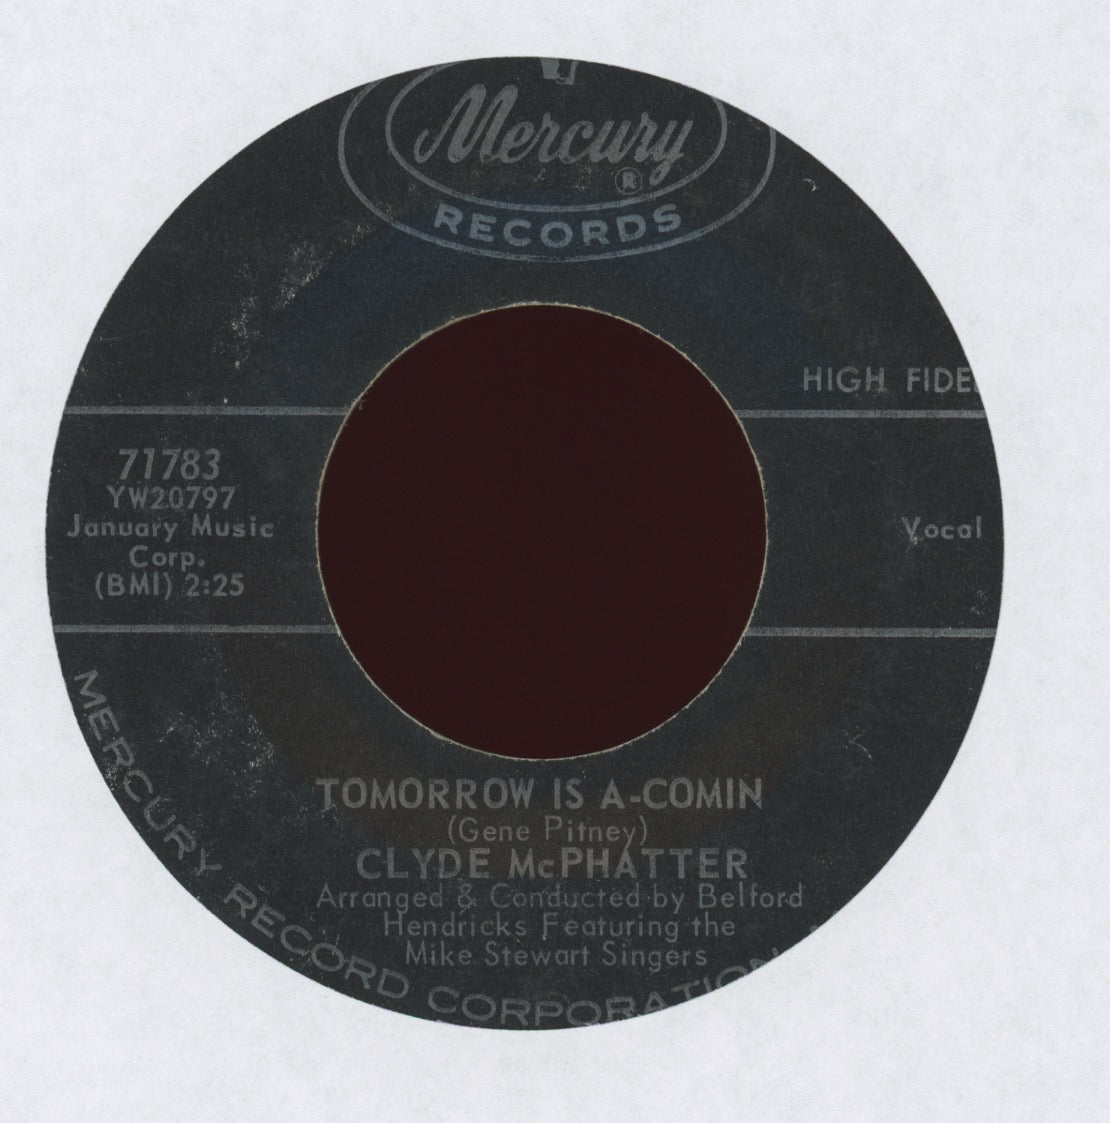 Clyde McPhatter - I'll Love You Til The Cows Come Home on Mercury